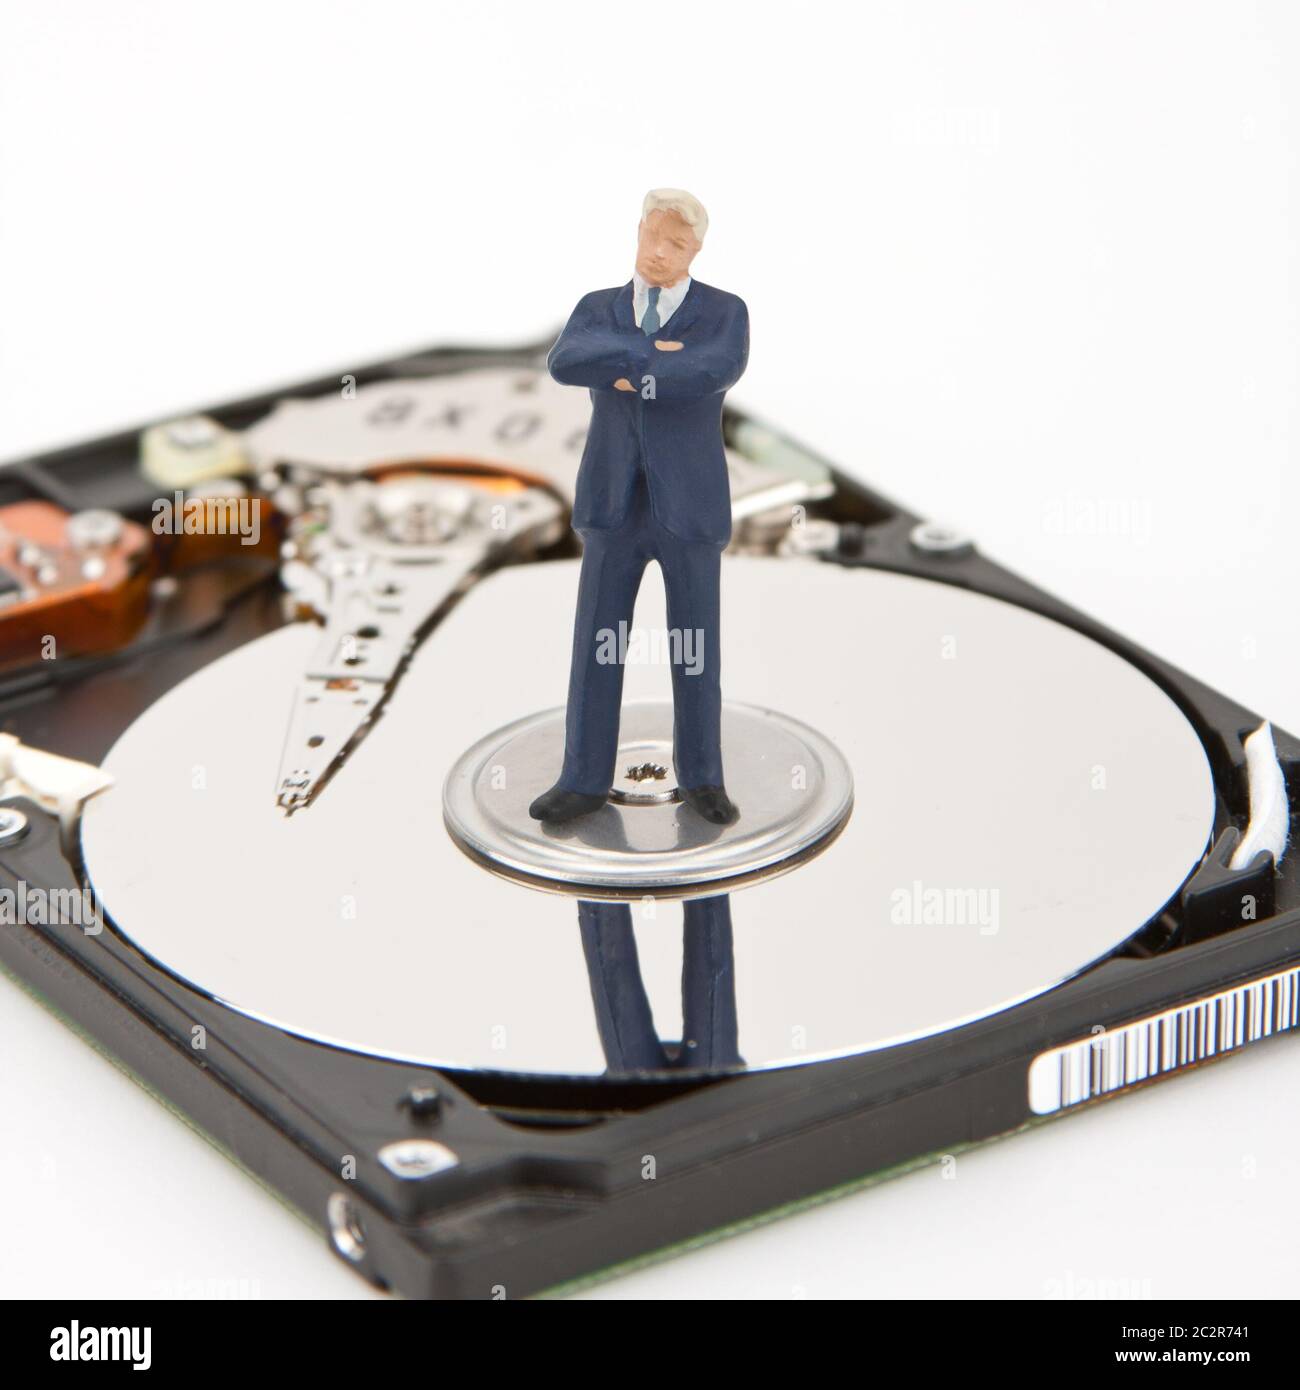 IT security. Businessman on computer hard drive Stock Photo